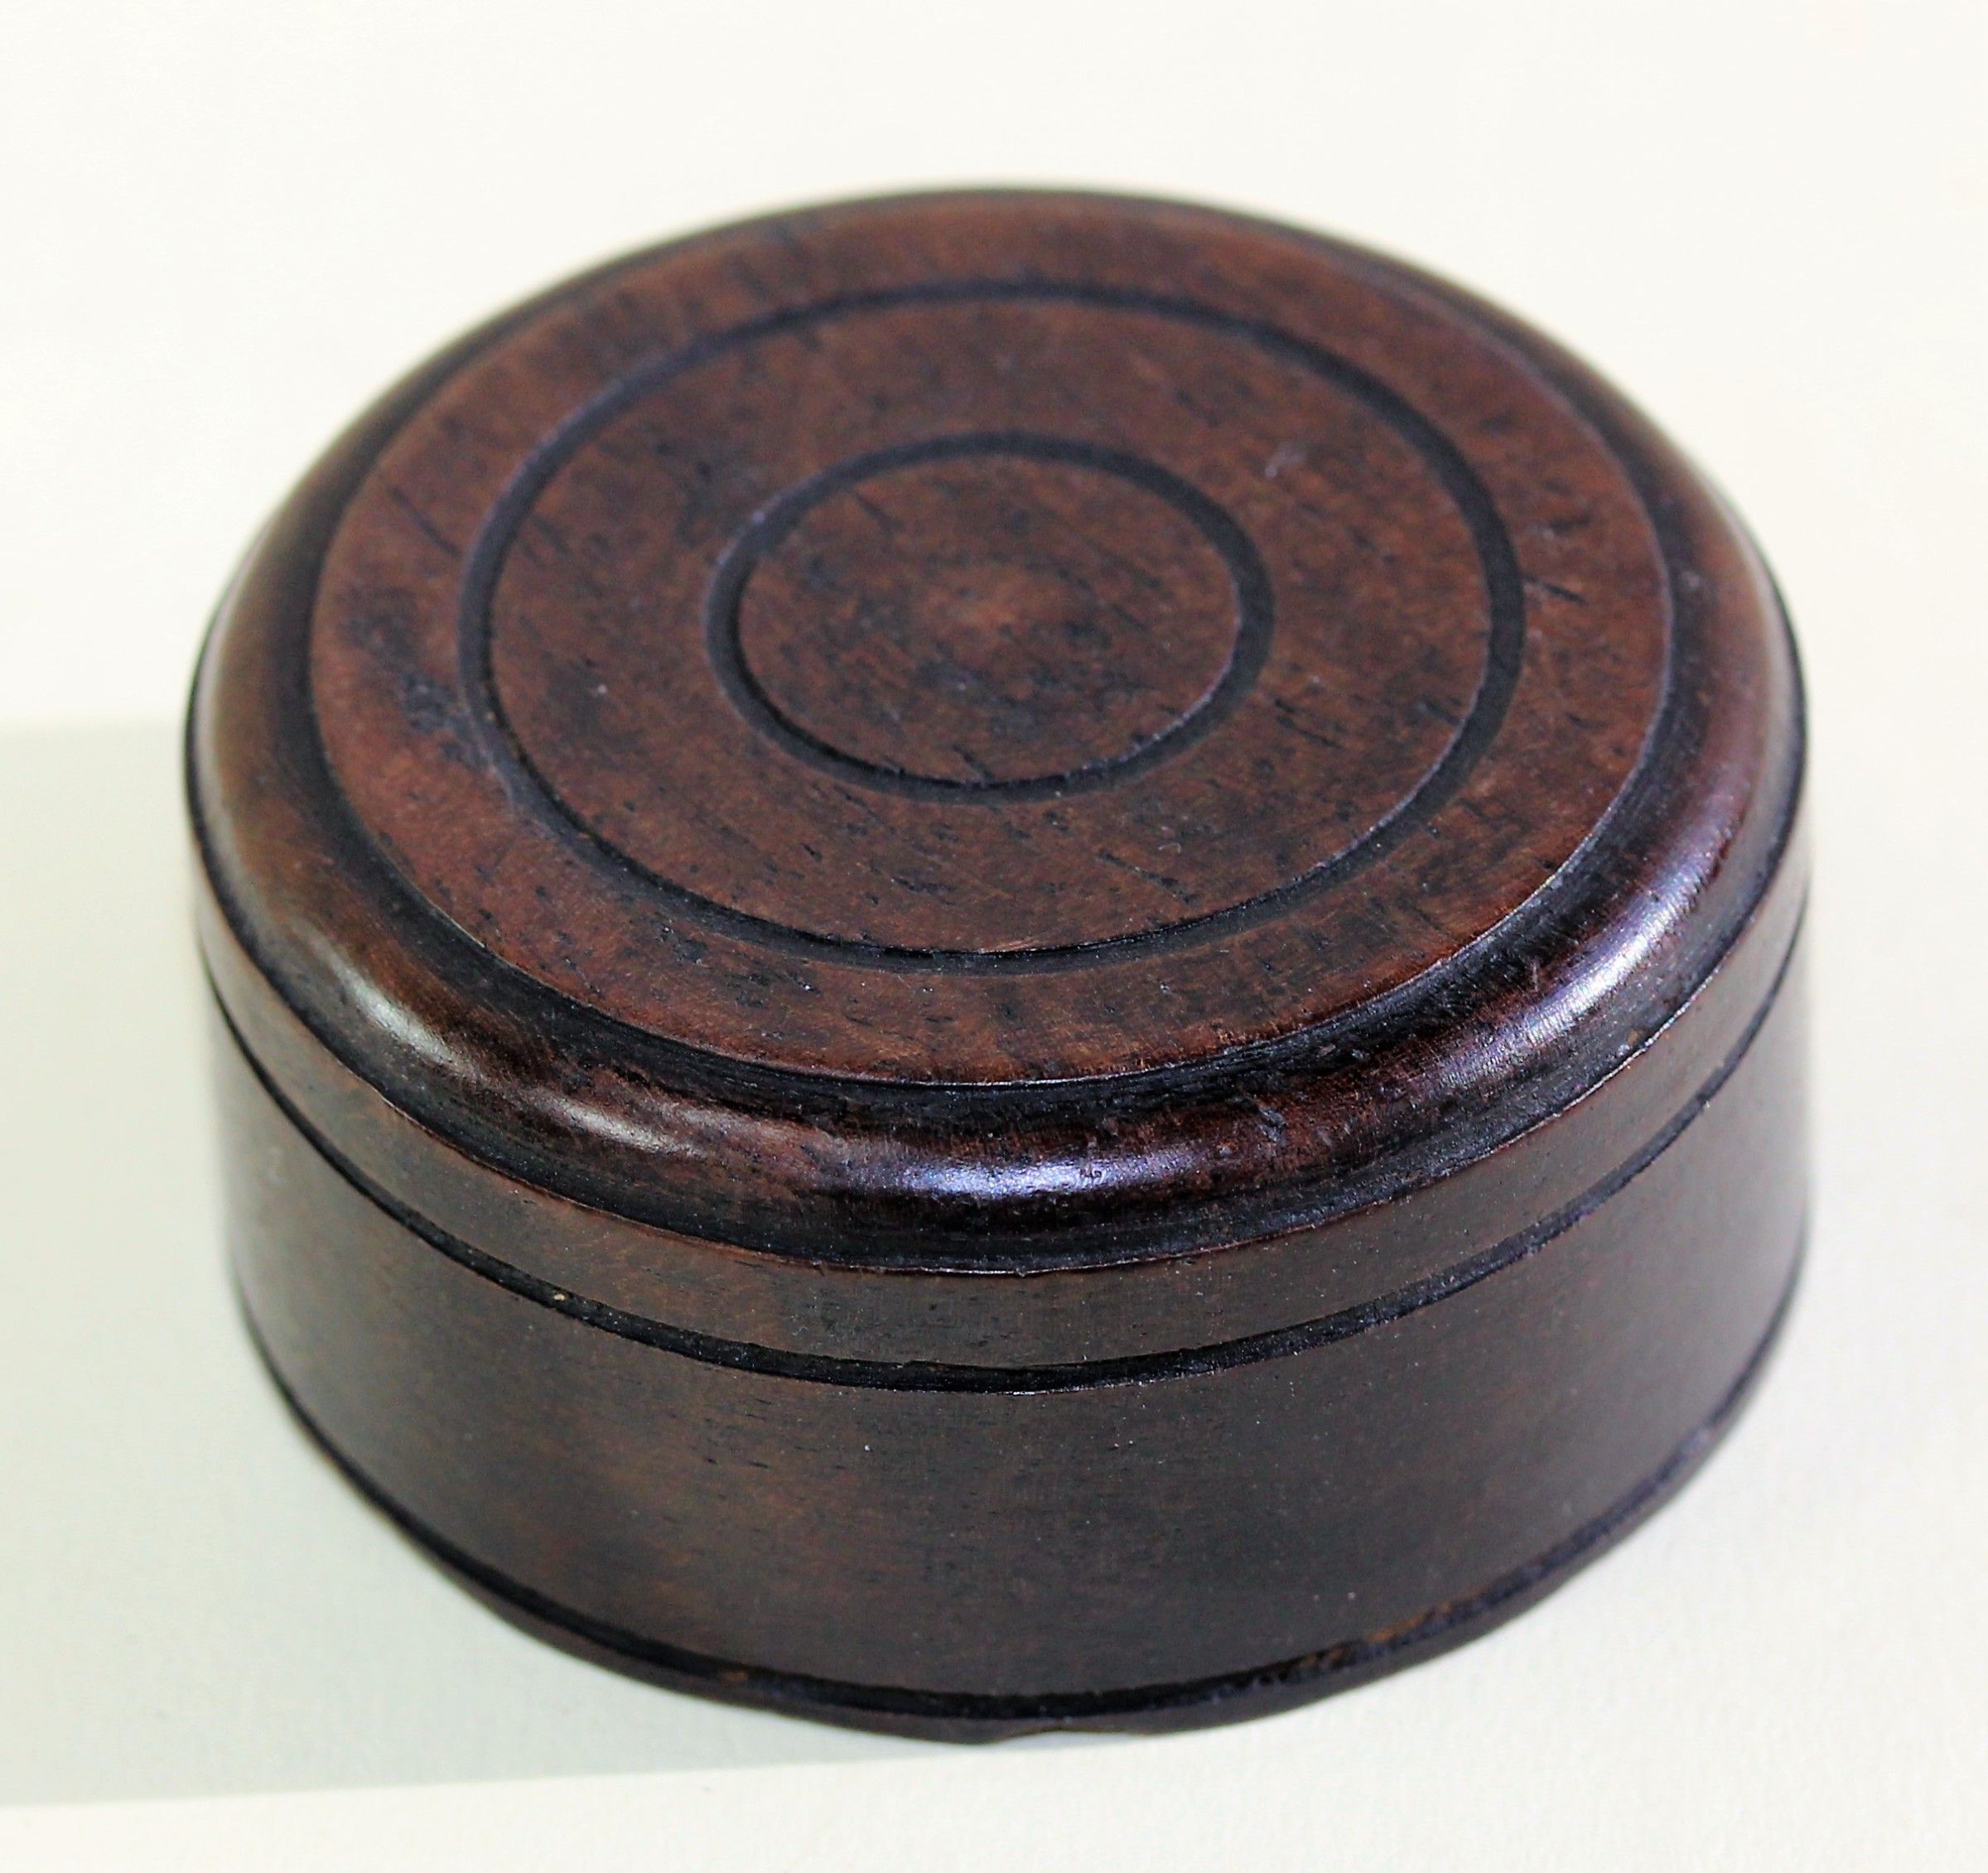 Chinese Round Carved Wooden Top or Cover for Jar or Tea Caddy